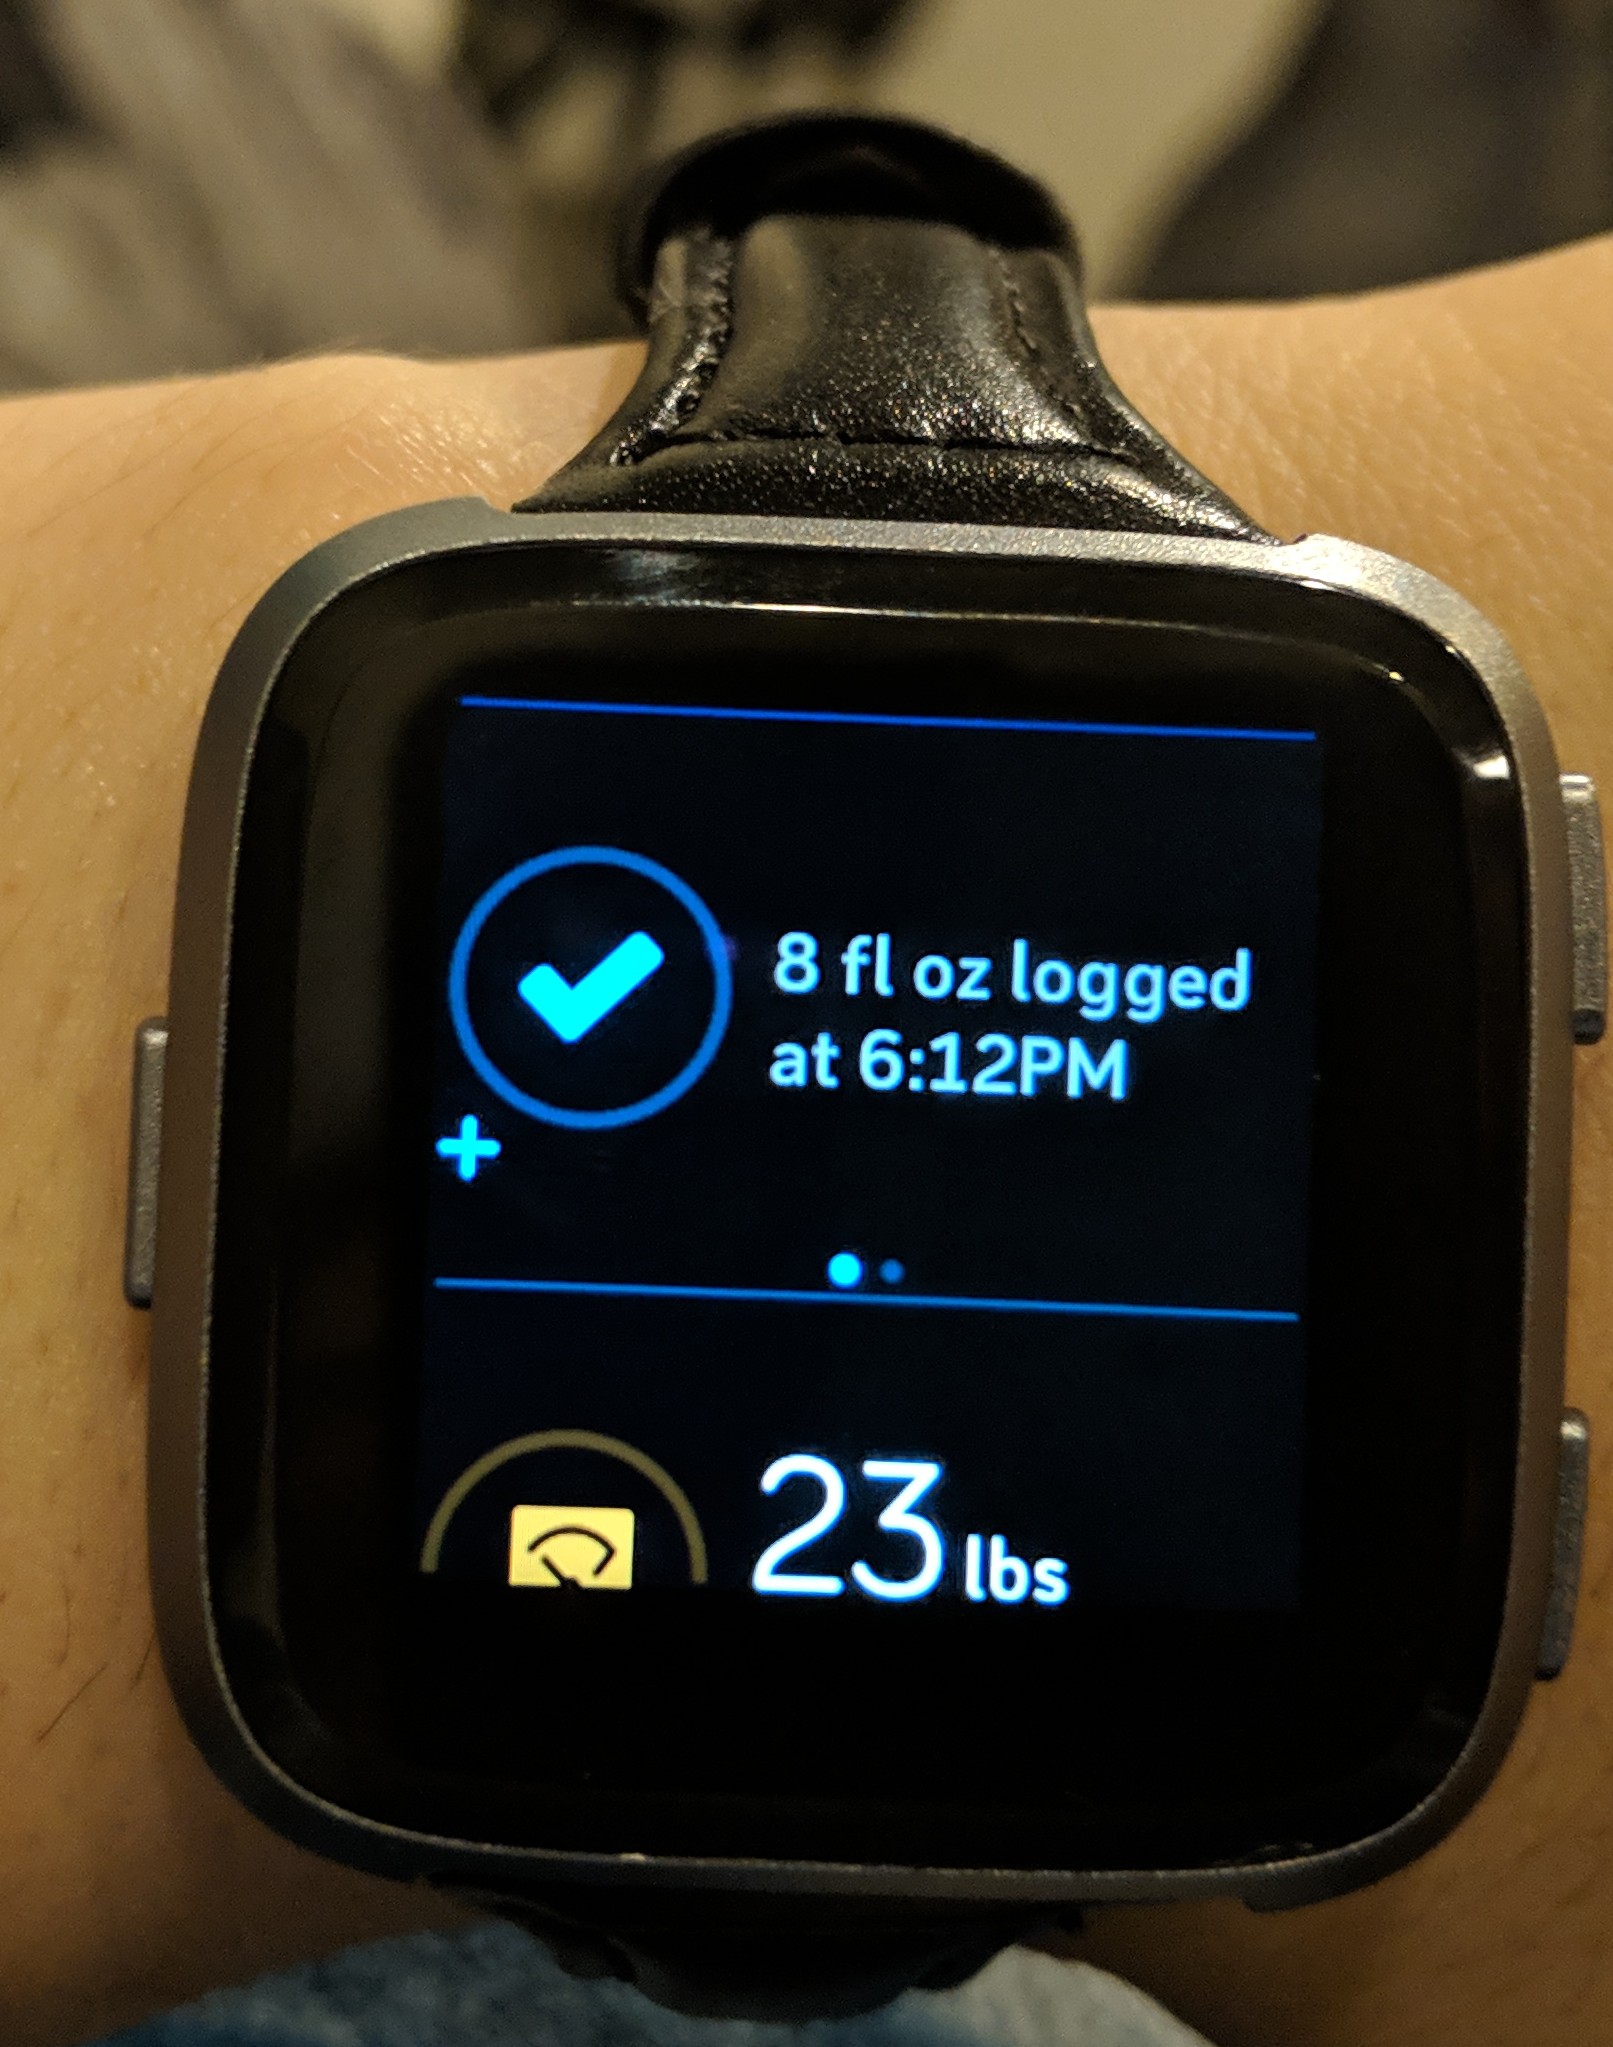 device doesn't show in Fitbit app 